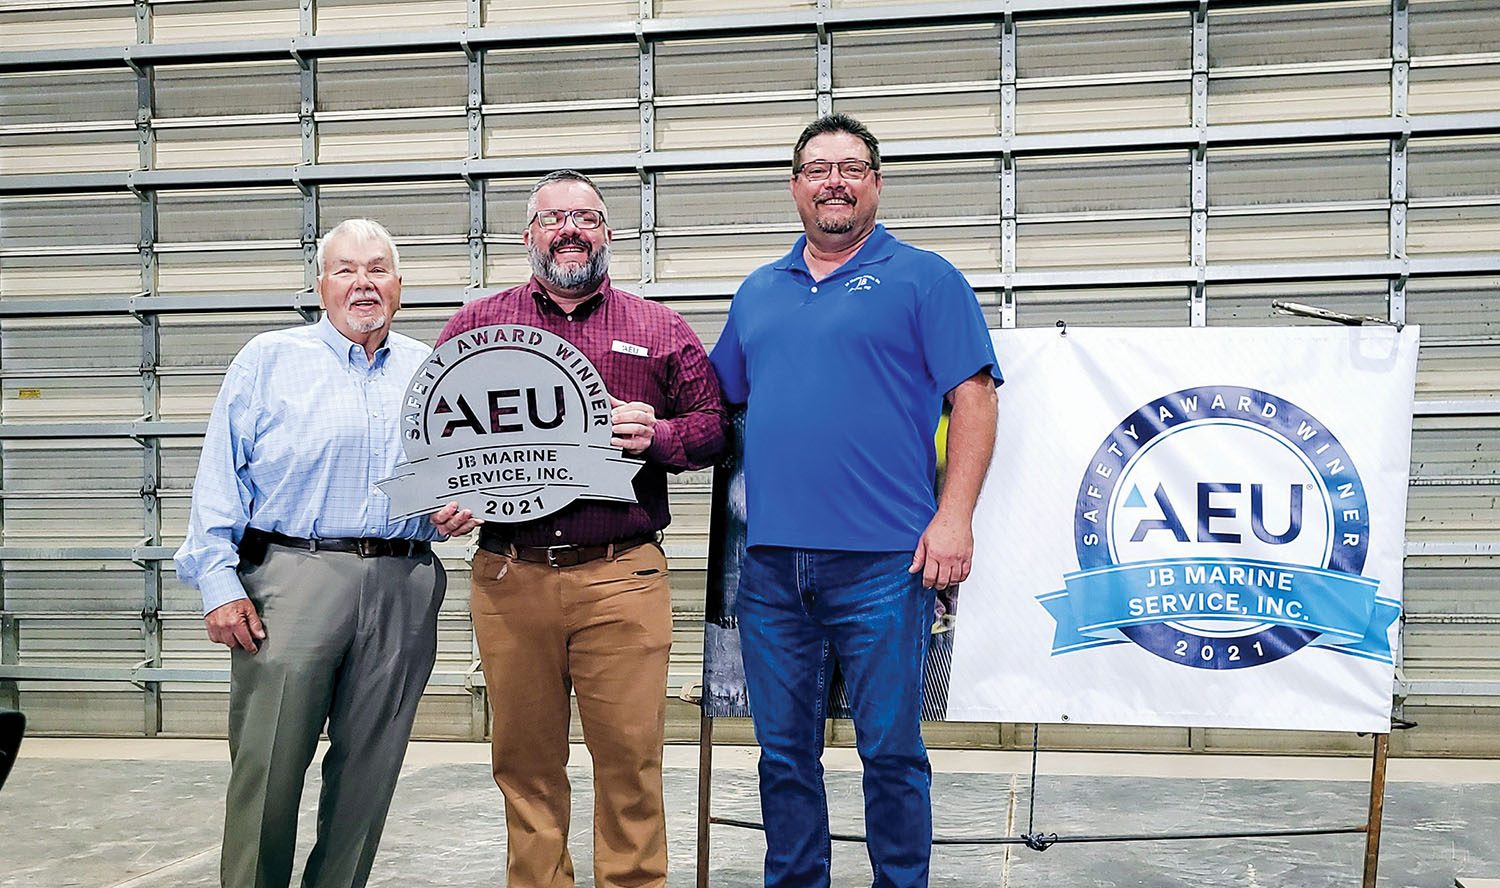 JB Marine officials George Foster, president (left), and Les Kapper, director of safety (right), receive the AEU Safety Award from David Widener, managing director of American Equity Underwriters.